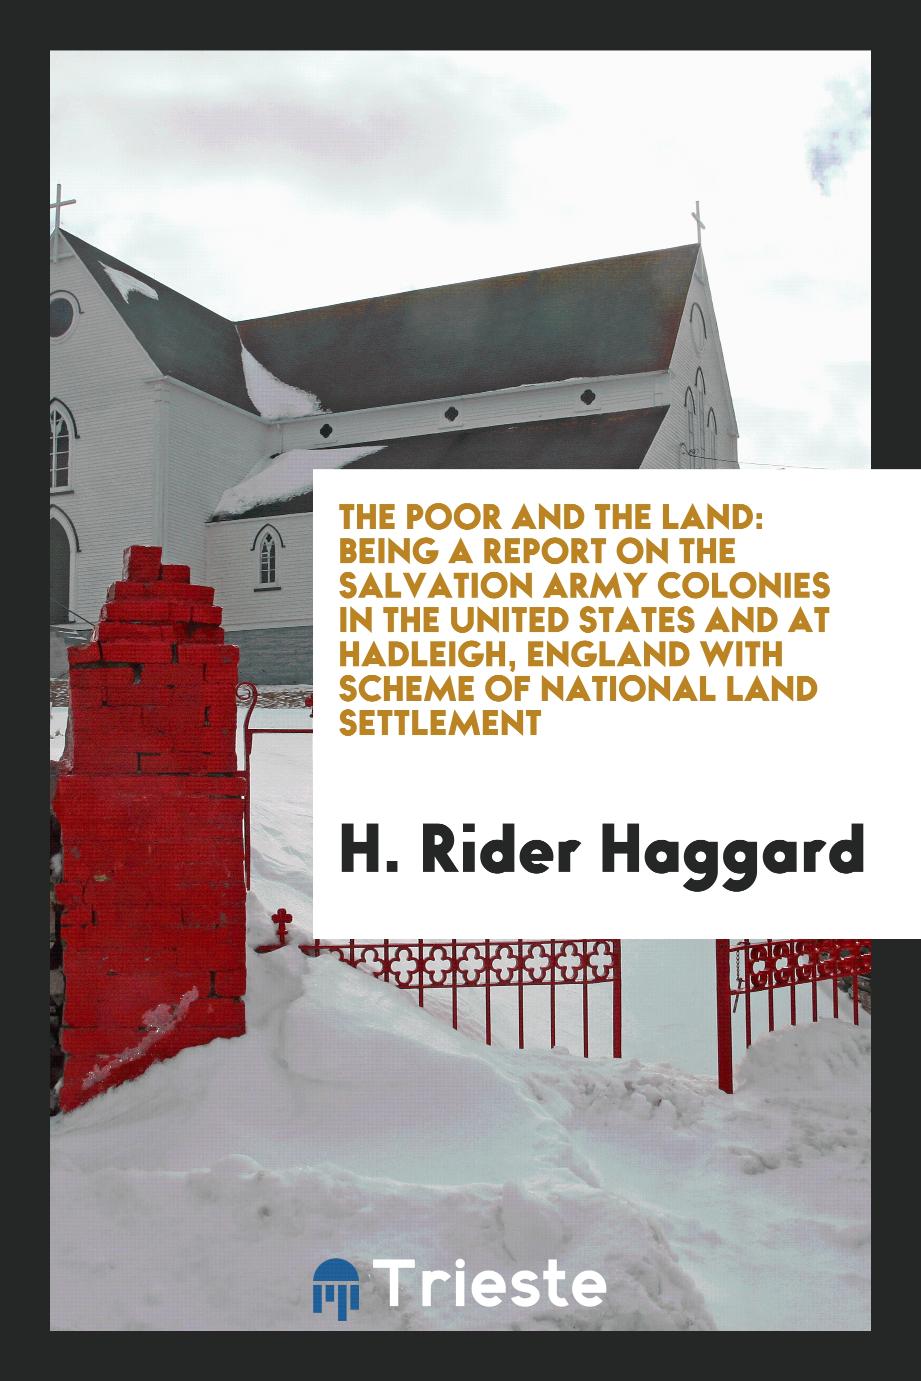 The Poor and the Land: Being a Report on the Salvation Army Colonies in the United States and at Hadleigh, England with Scheme of National Land Settlement